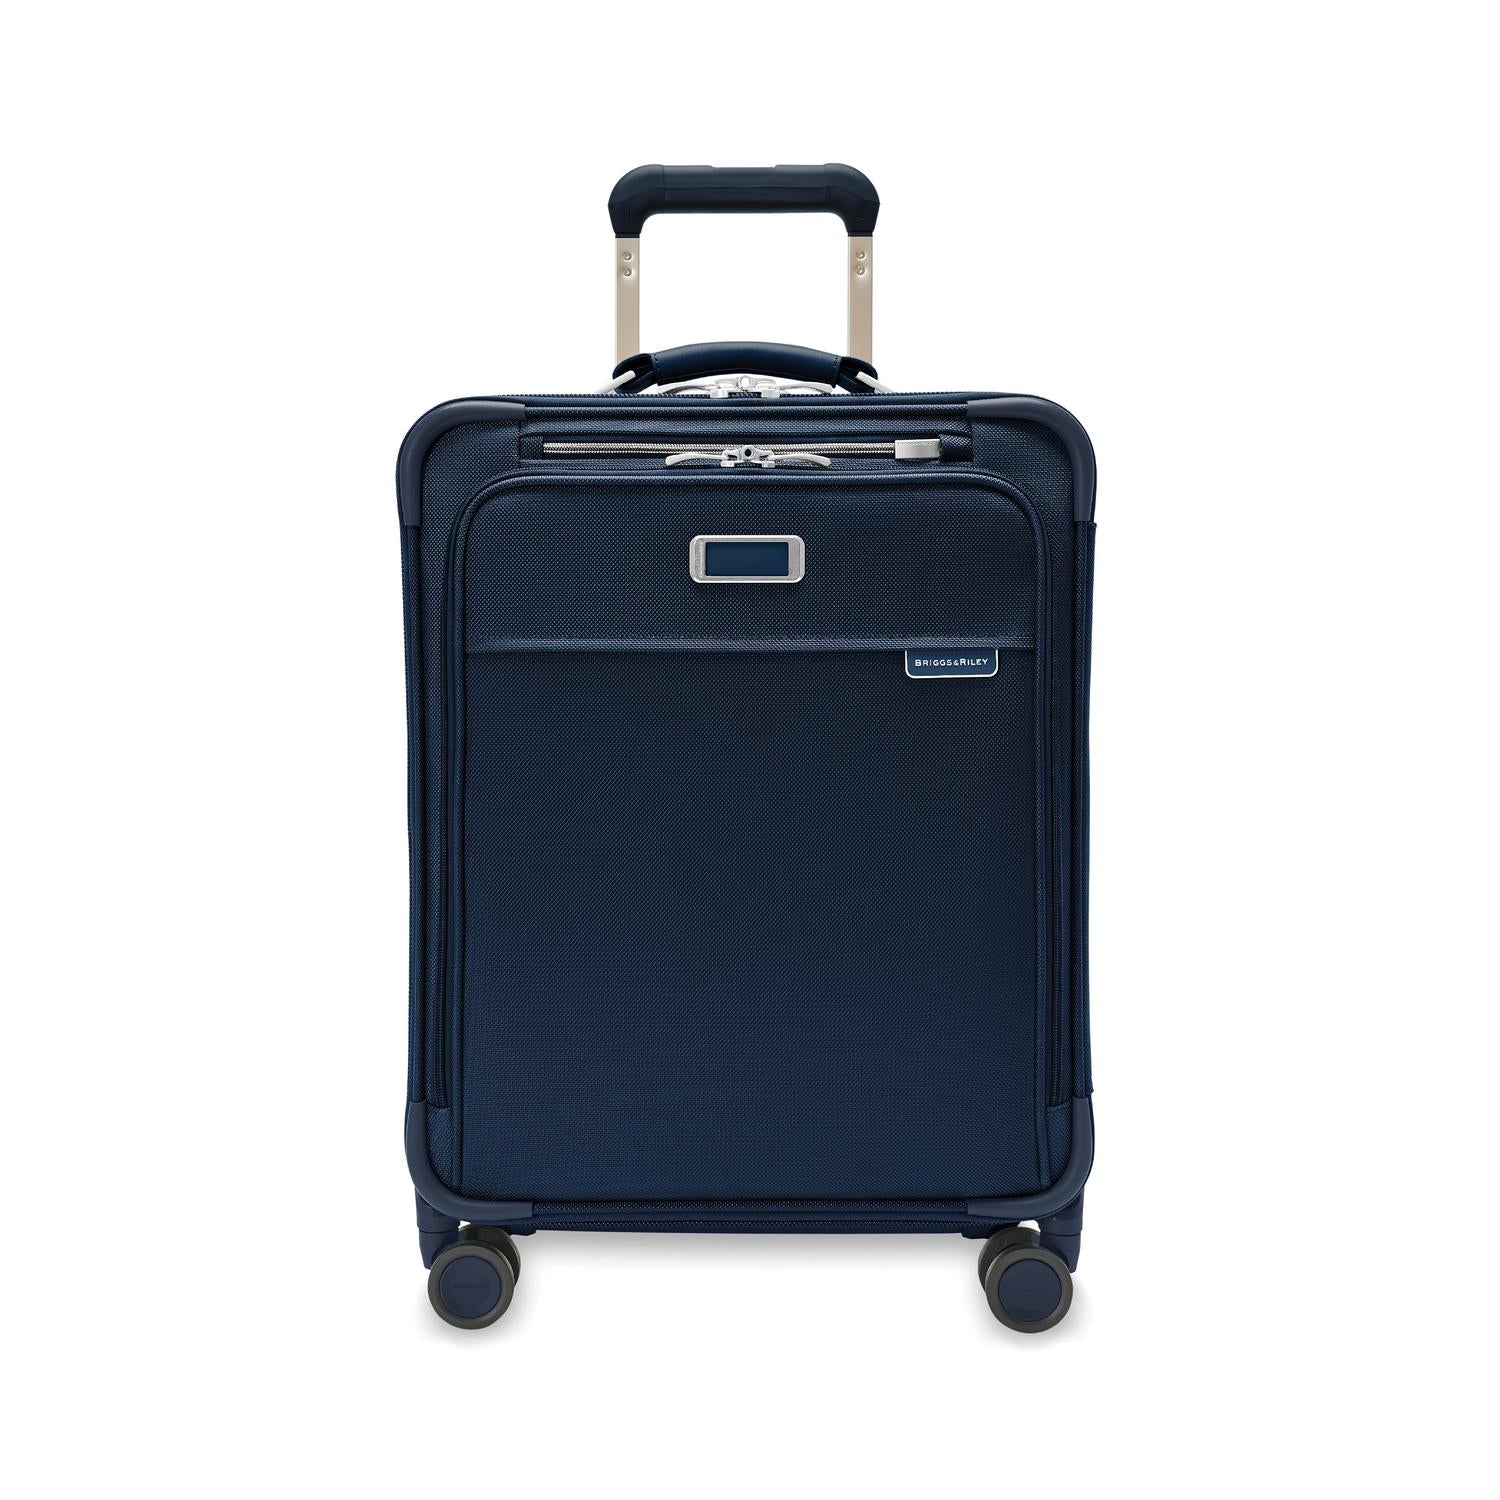 Global 53cm Carry-On Expandable Spinner